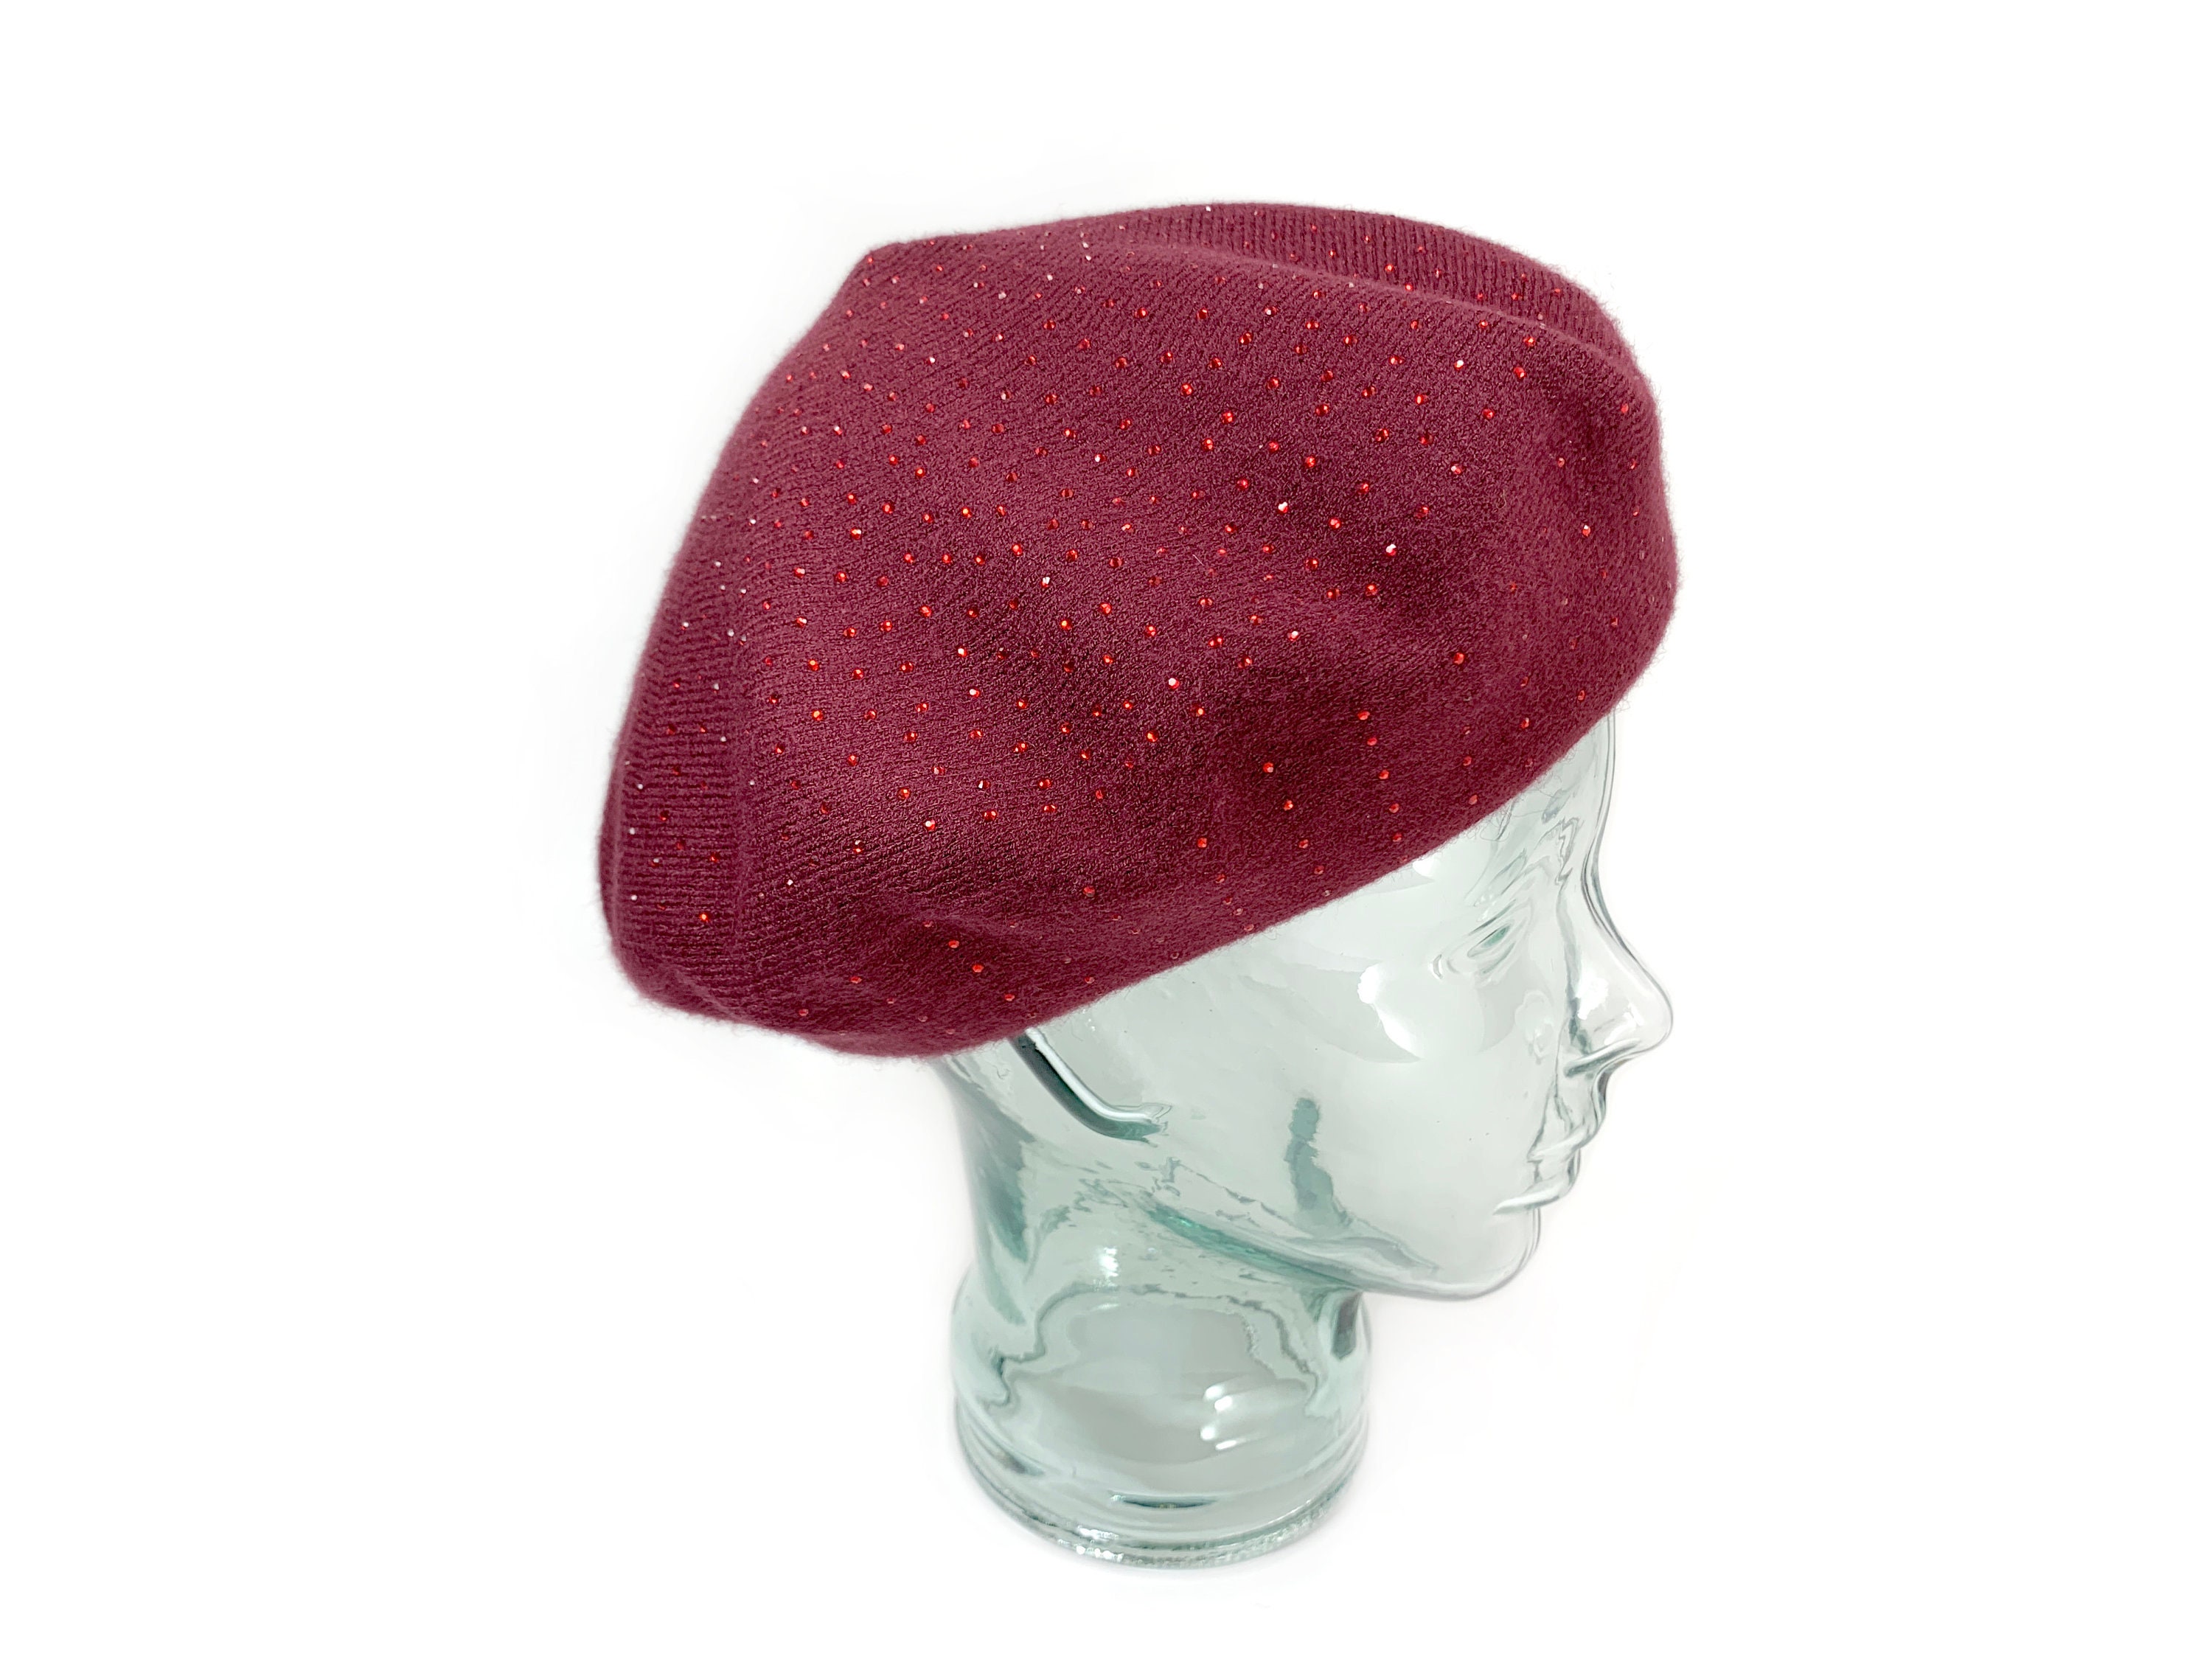 Burgundy Knit Beret, Cashmere Blend Beret With Sparkle, Reversible Soft Wool Beret, Retro Style Winter Hat For Women